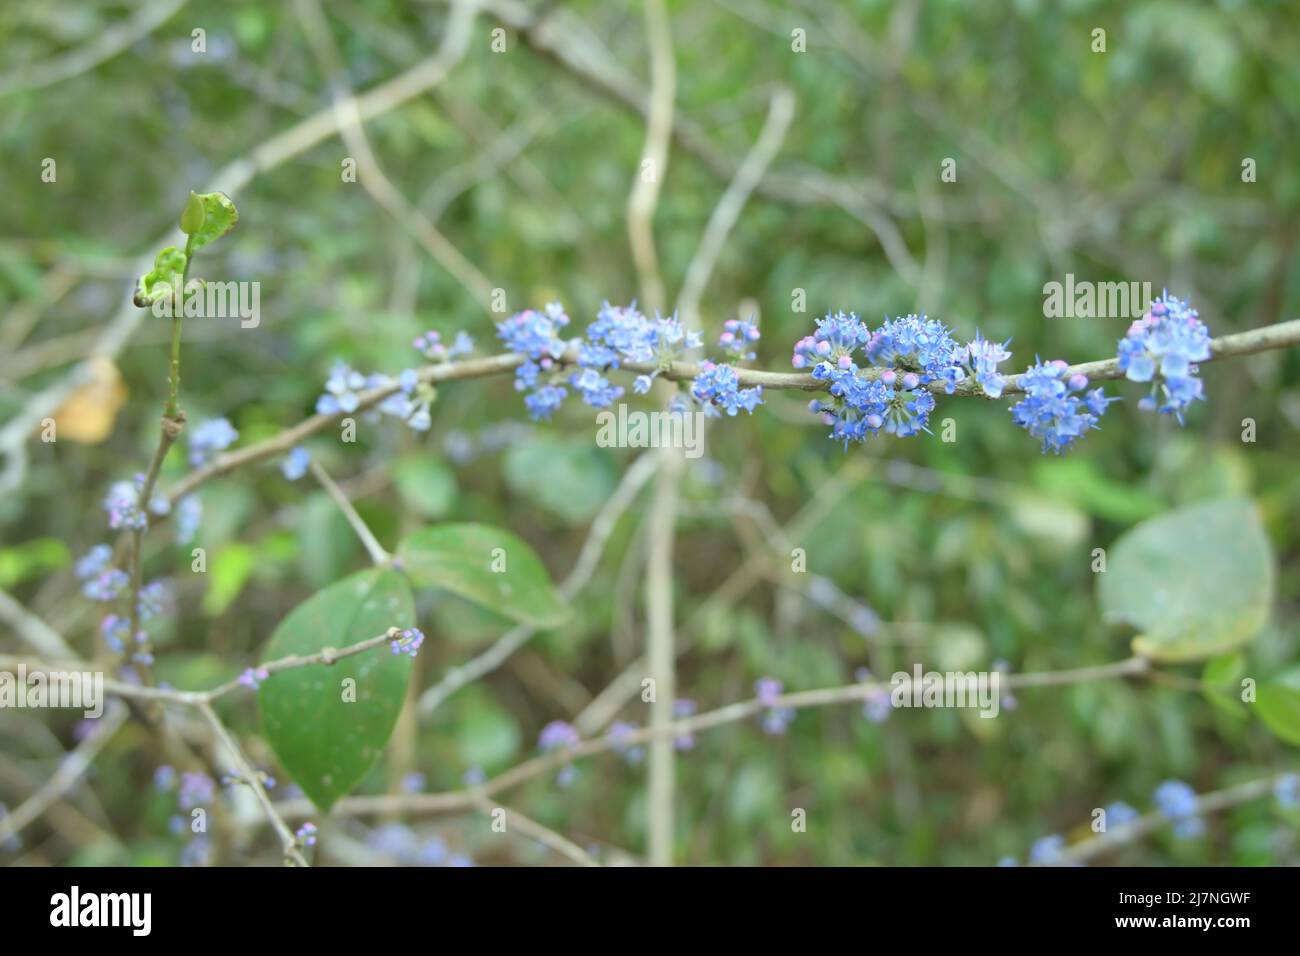 A tiny purple colored wildflower cluster on the surface of a wild plant stem Stock Photo